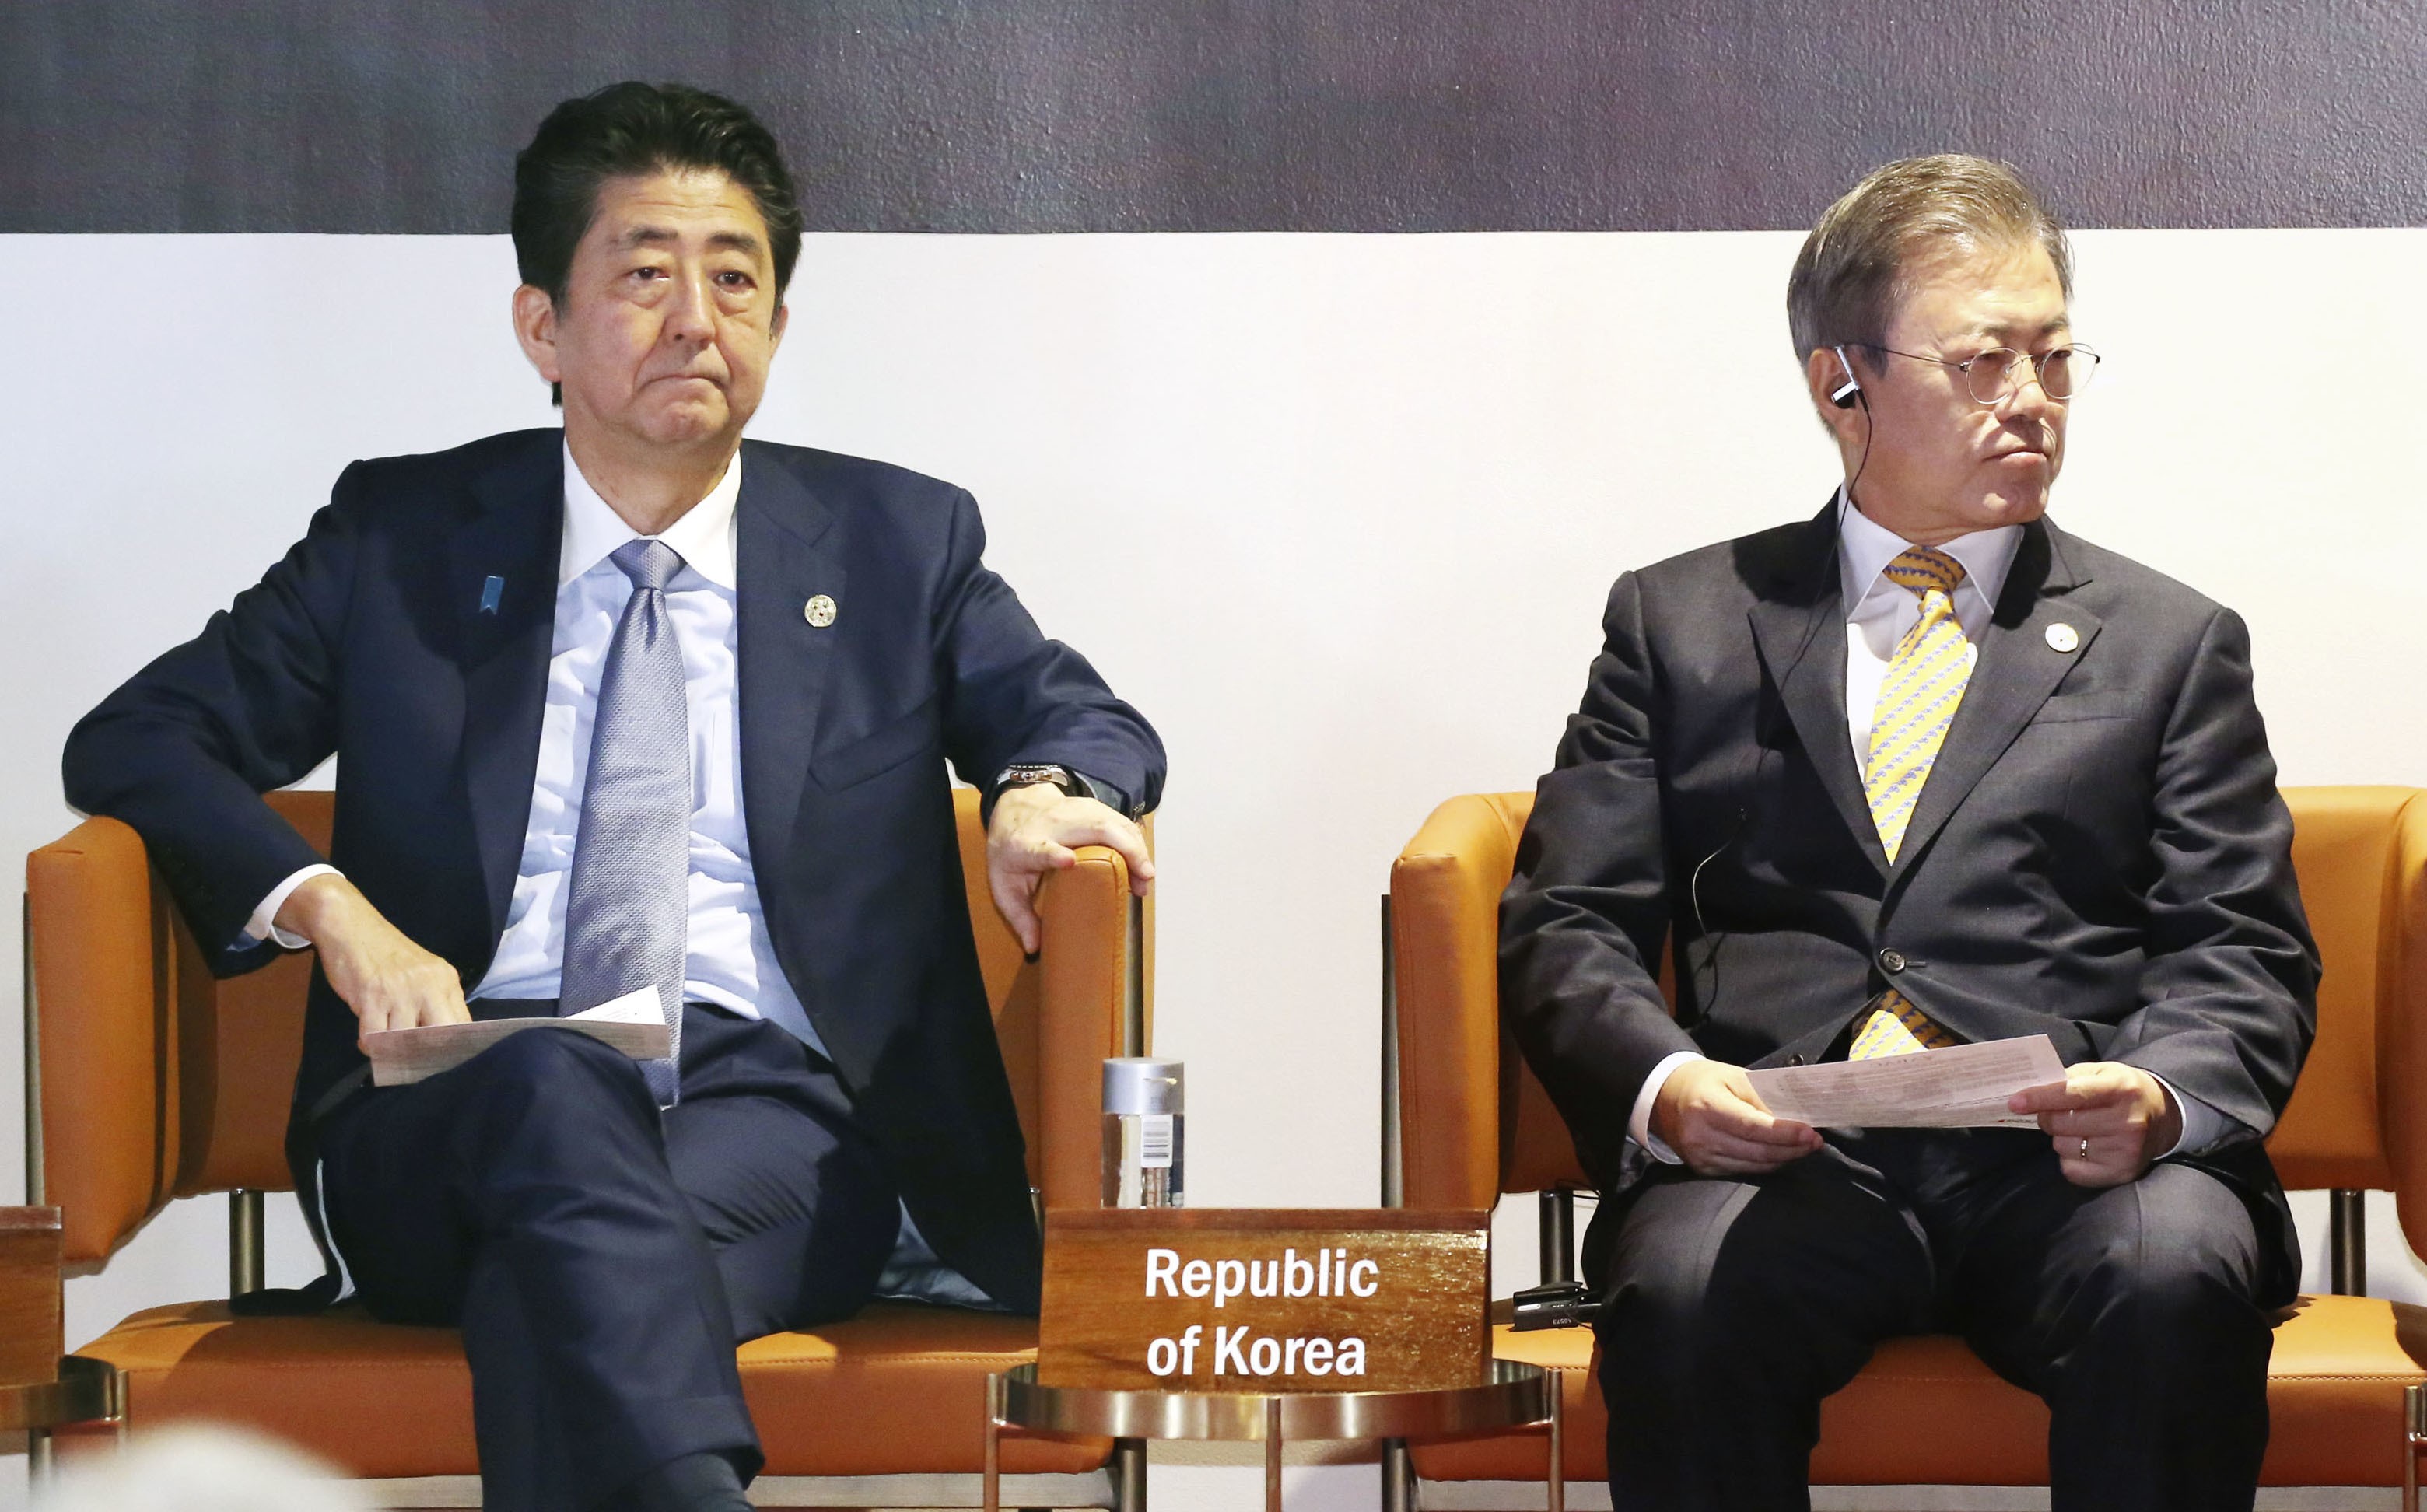 Japanese Prime Minister Shinzo Abe and South Korean President Moon Jae-in attend an event on the sidelines of the Asia-Pacific Economic Cooperation forum summit in Papua New Guinea in November 2018. Under the conservative Abe and progressive Moon, relations between Japan and South Korea have reached their lowest point in decades. Photo: Kyodo